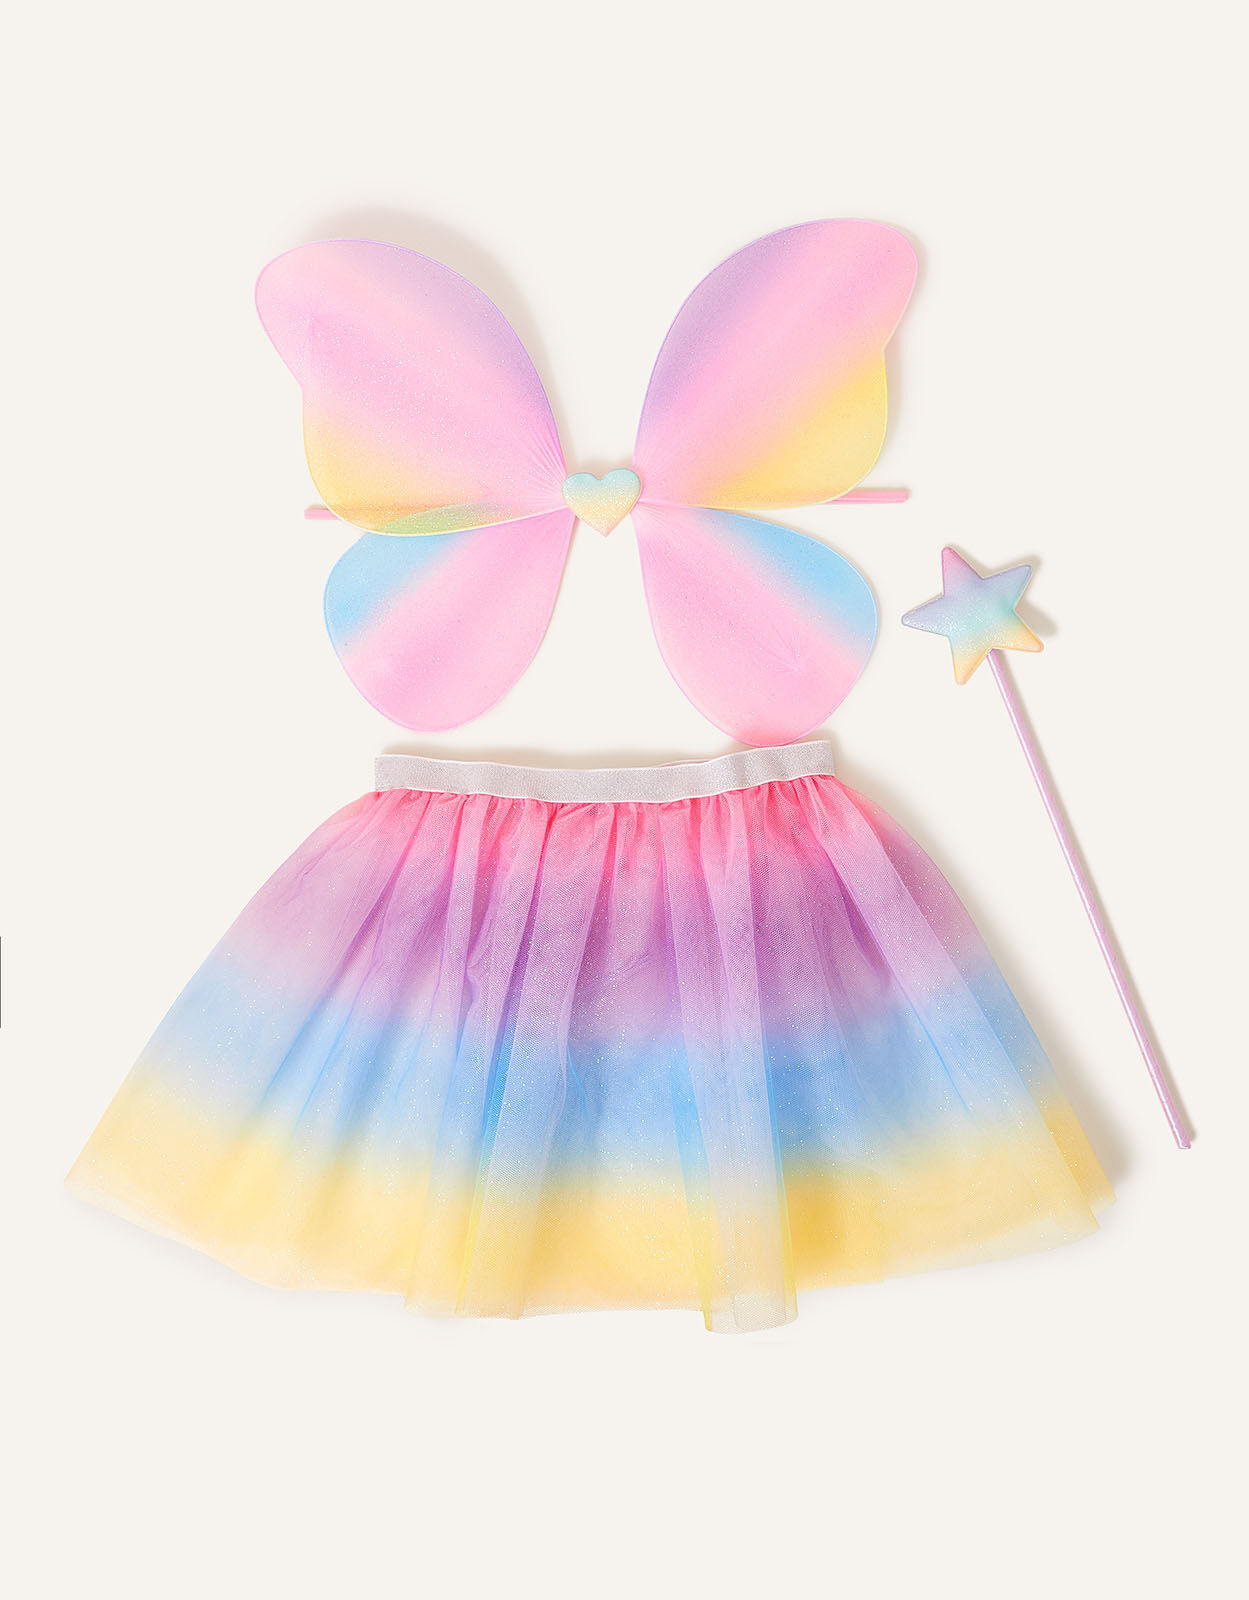 Girls Dresses Fancy Rainbow Dress Girls Flying Sleeve Kids Gown Ruffle  Tulle Dress Princess Come Birthday Party Girl Clothing Sets W0224 From  Liancheng05, $23.78 | DHgate.Com